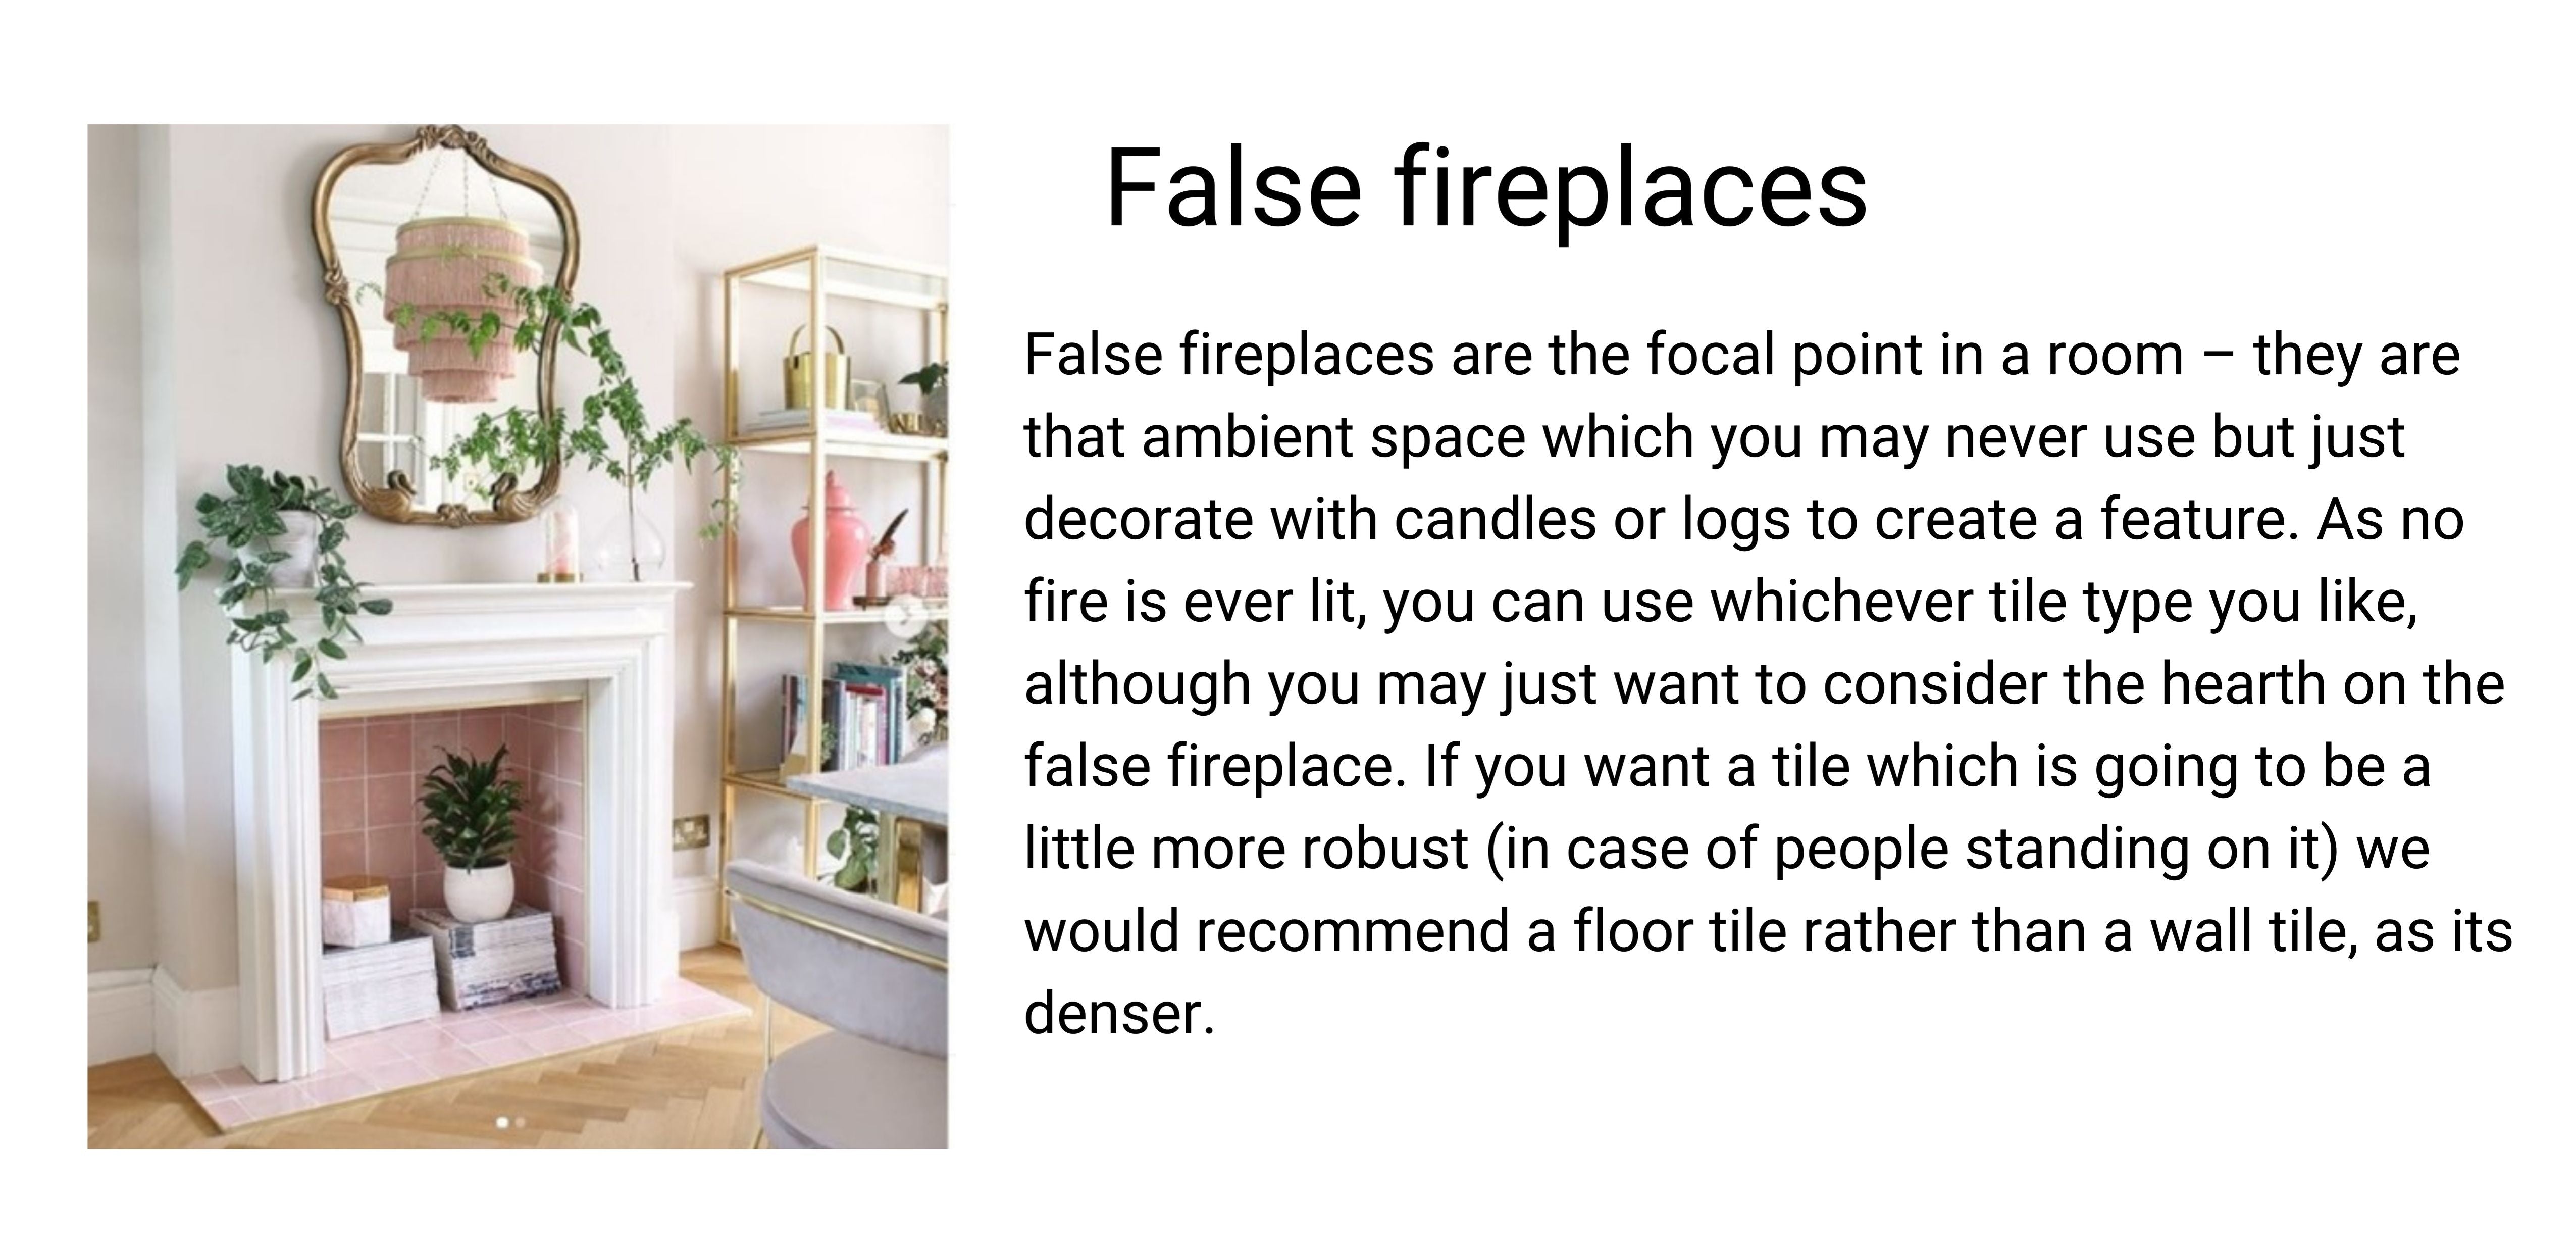 picture of a false fireplace